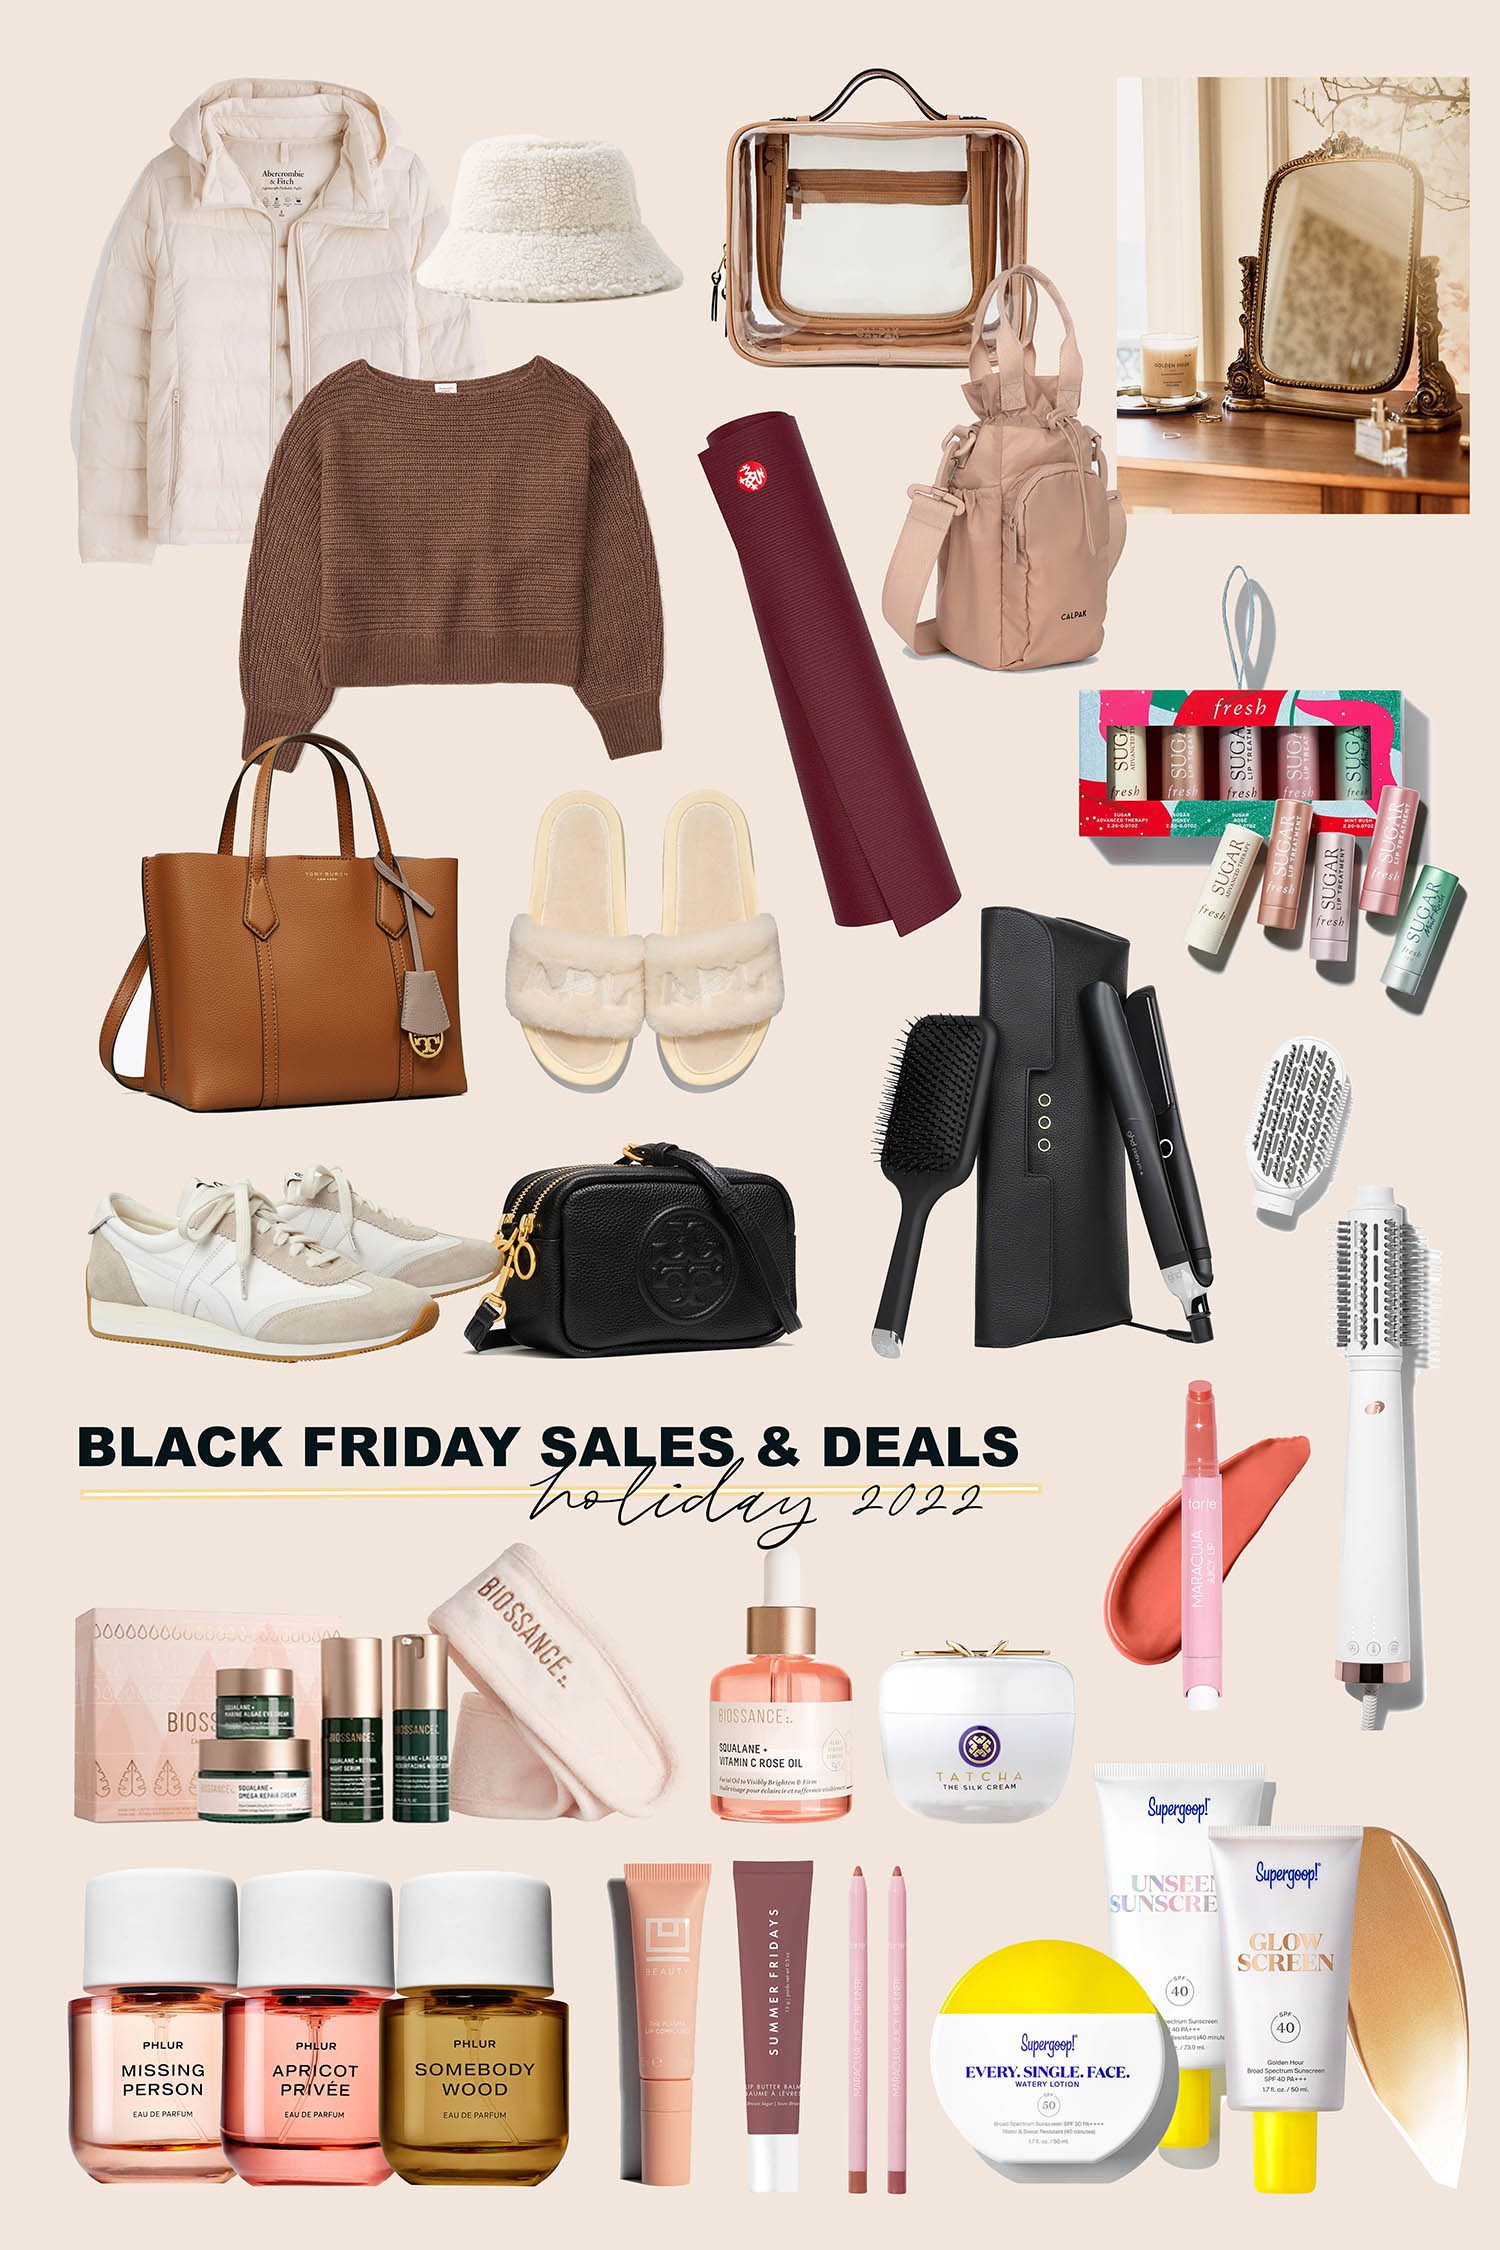 Black Friday Shopping Inspiration – CHOUQUETTE